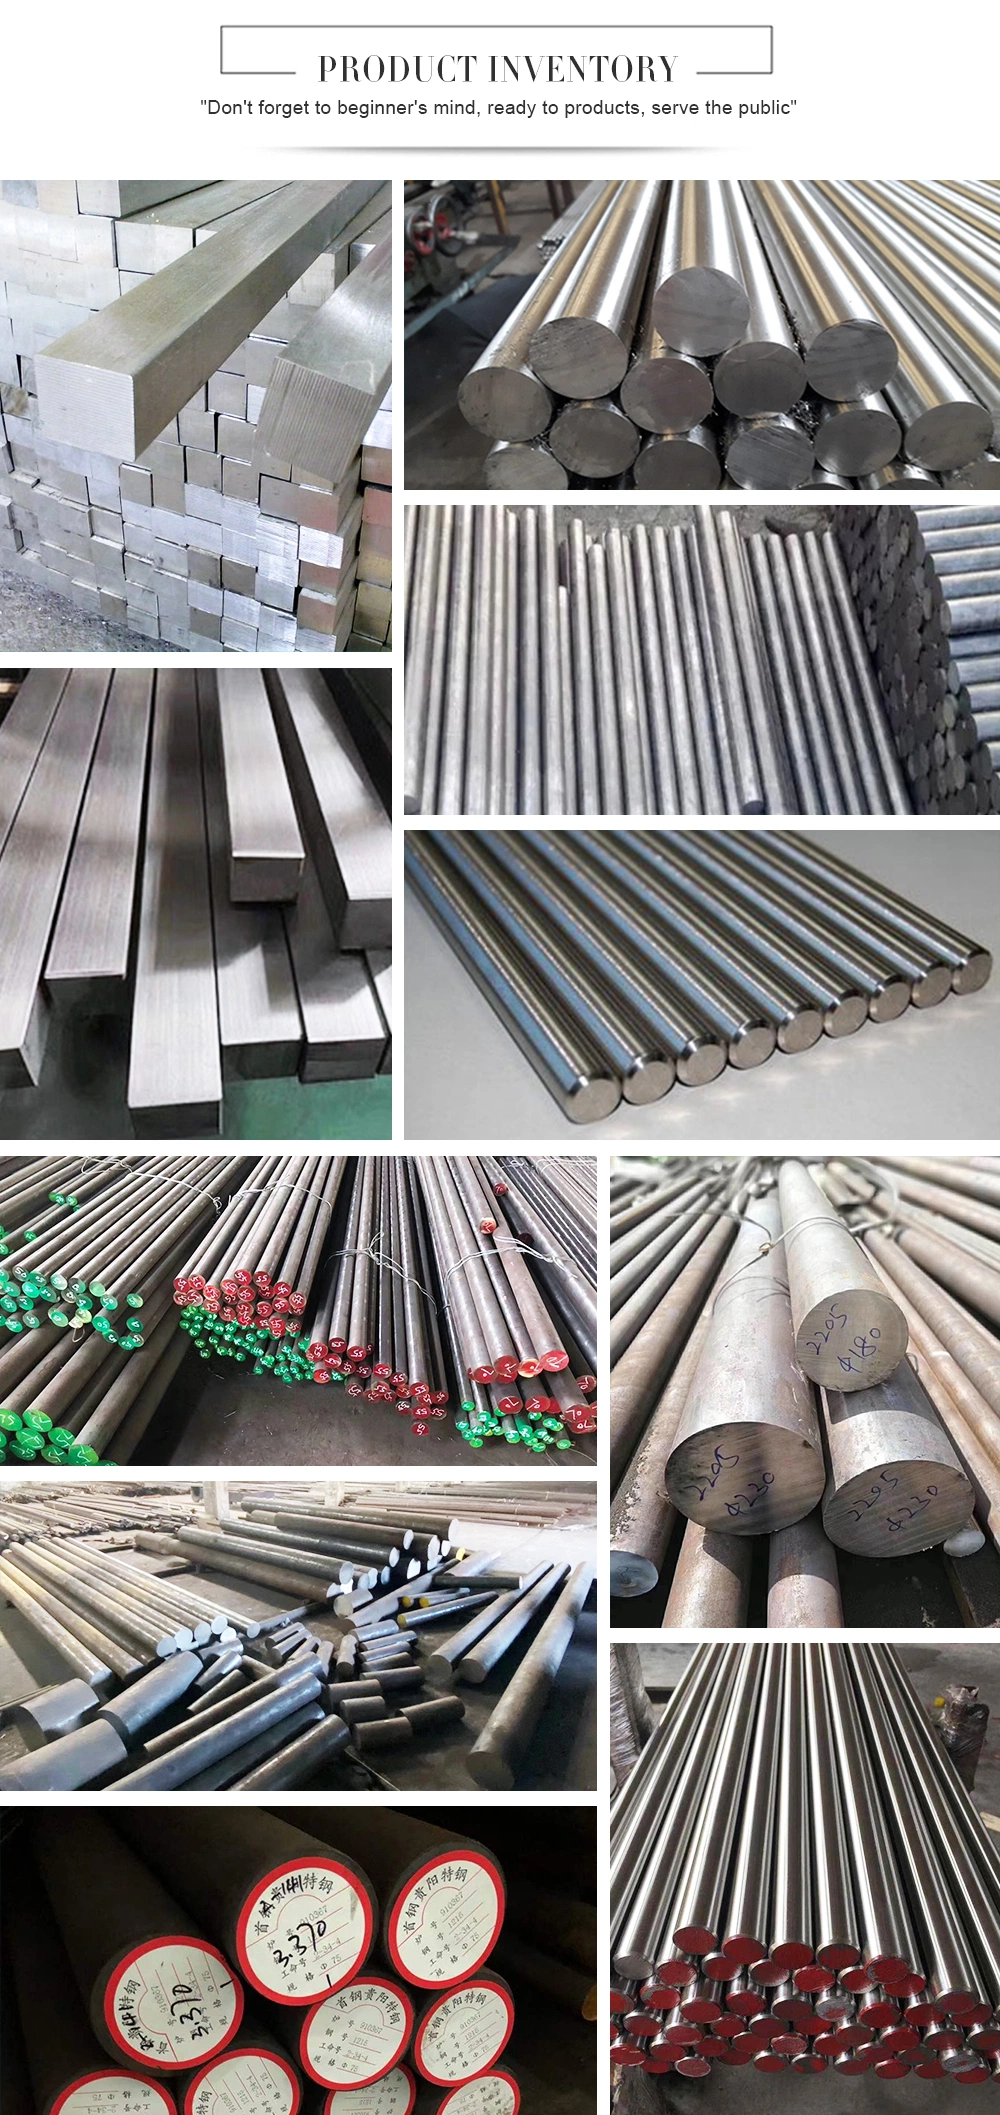 316L Rod Stainless Steel 201 Bright Bars Stainless Round Steel Bar 316 Stainless Steel Rod